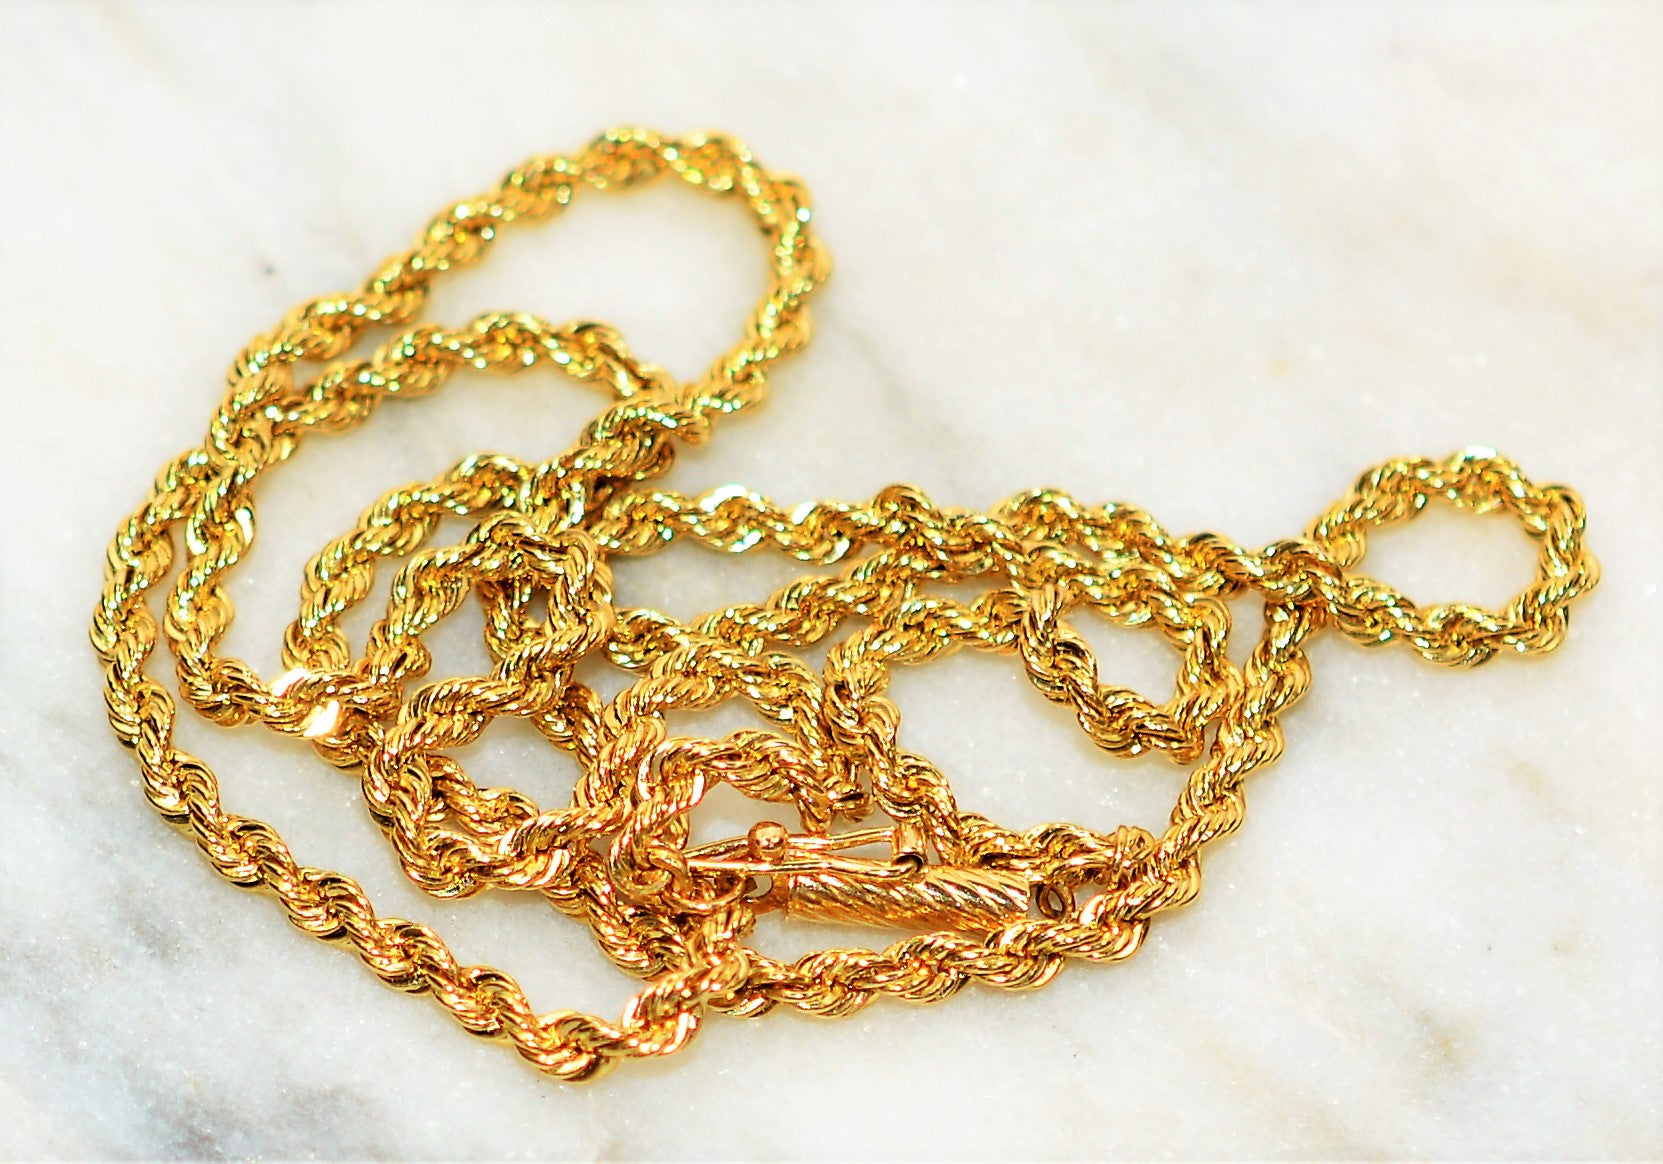 14K Solid Gold 16" 2.50mm Rope Chain Necklace Fine Jewelry Statement Necklace Gold Chain Vintage Necklace Men's Jewelry Fine Estate Necklace